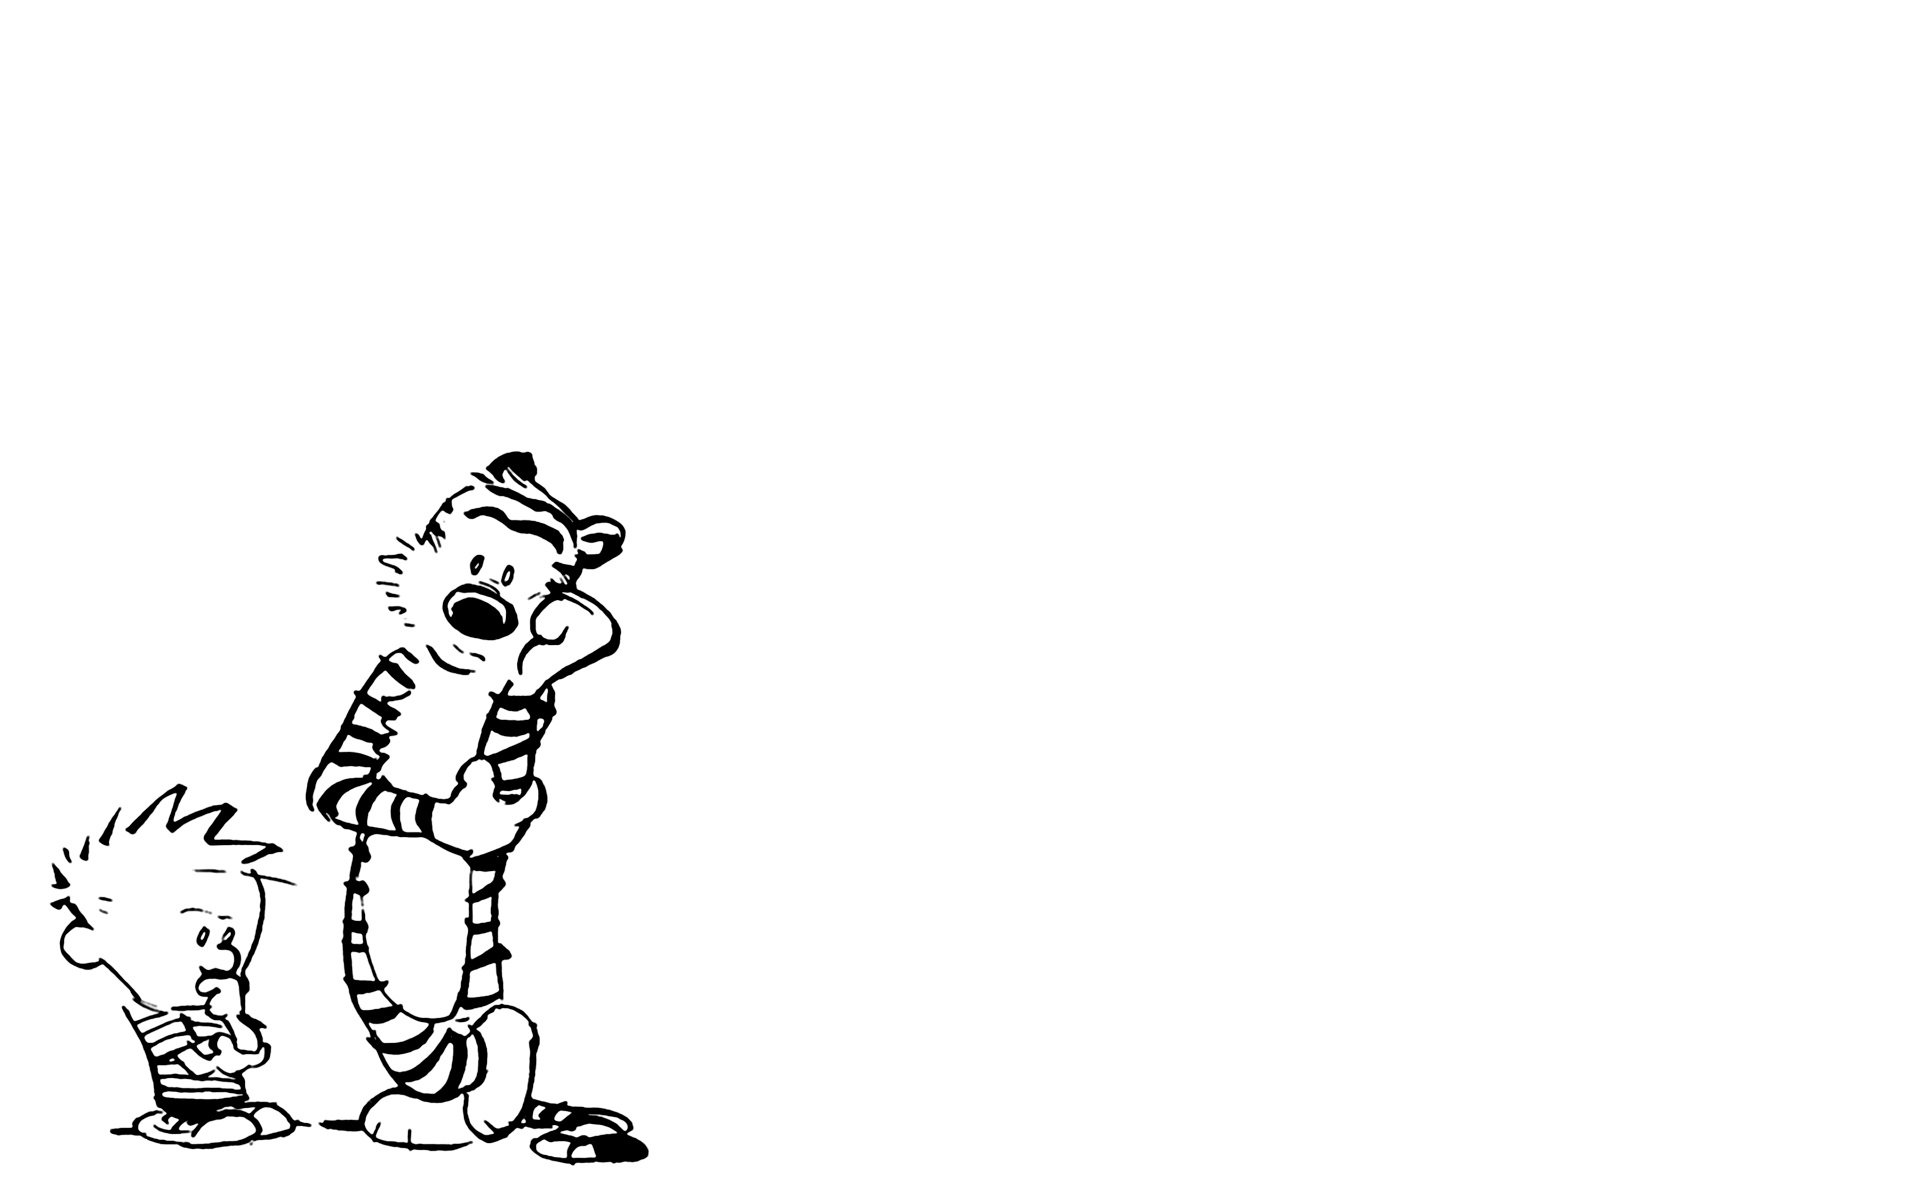 Calvin and Hobbes Wallpapers Black and White